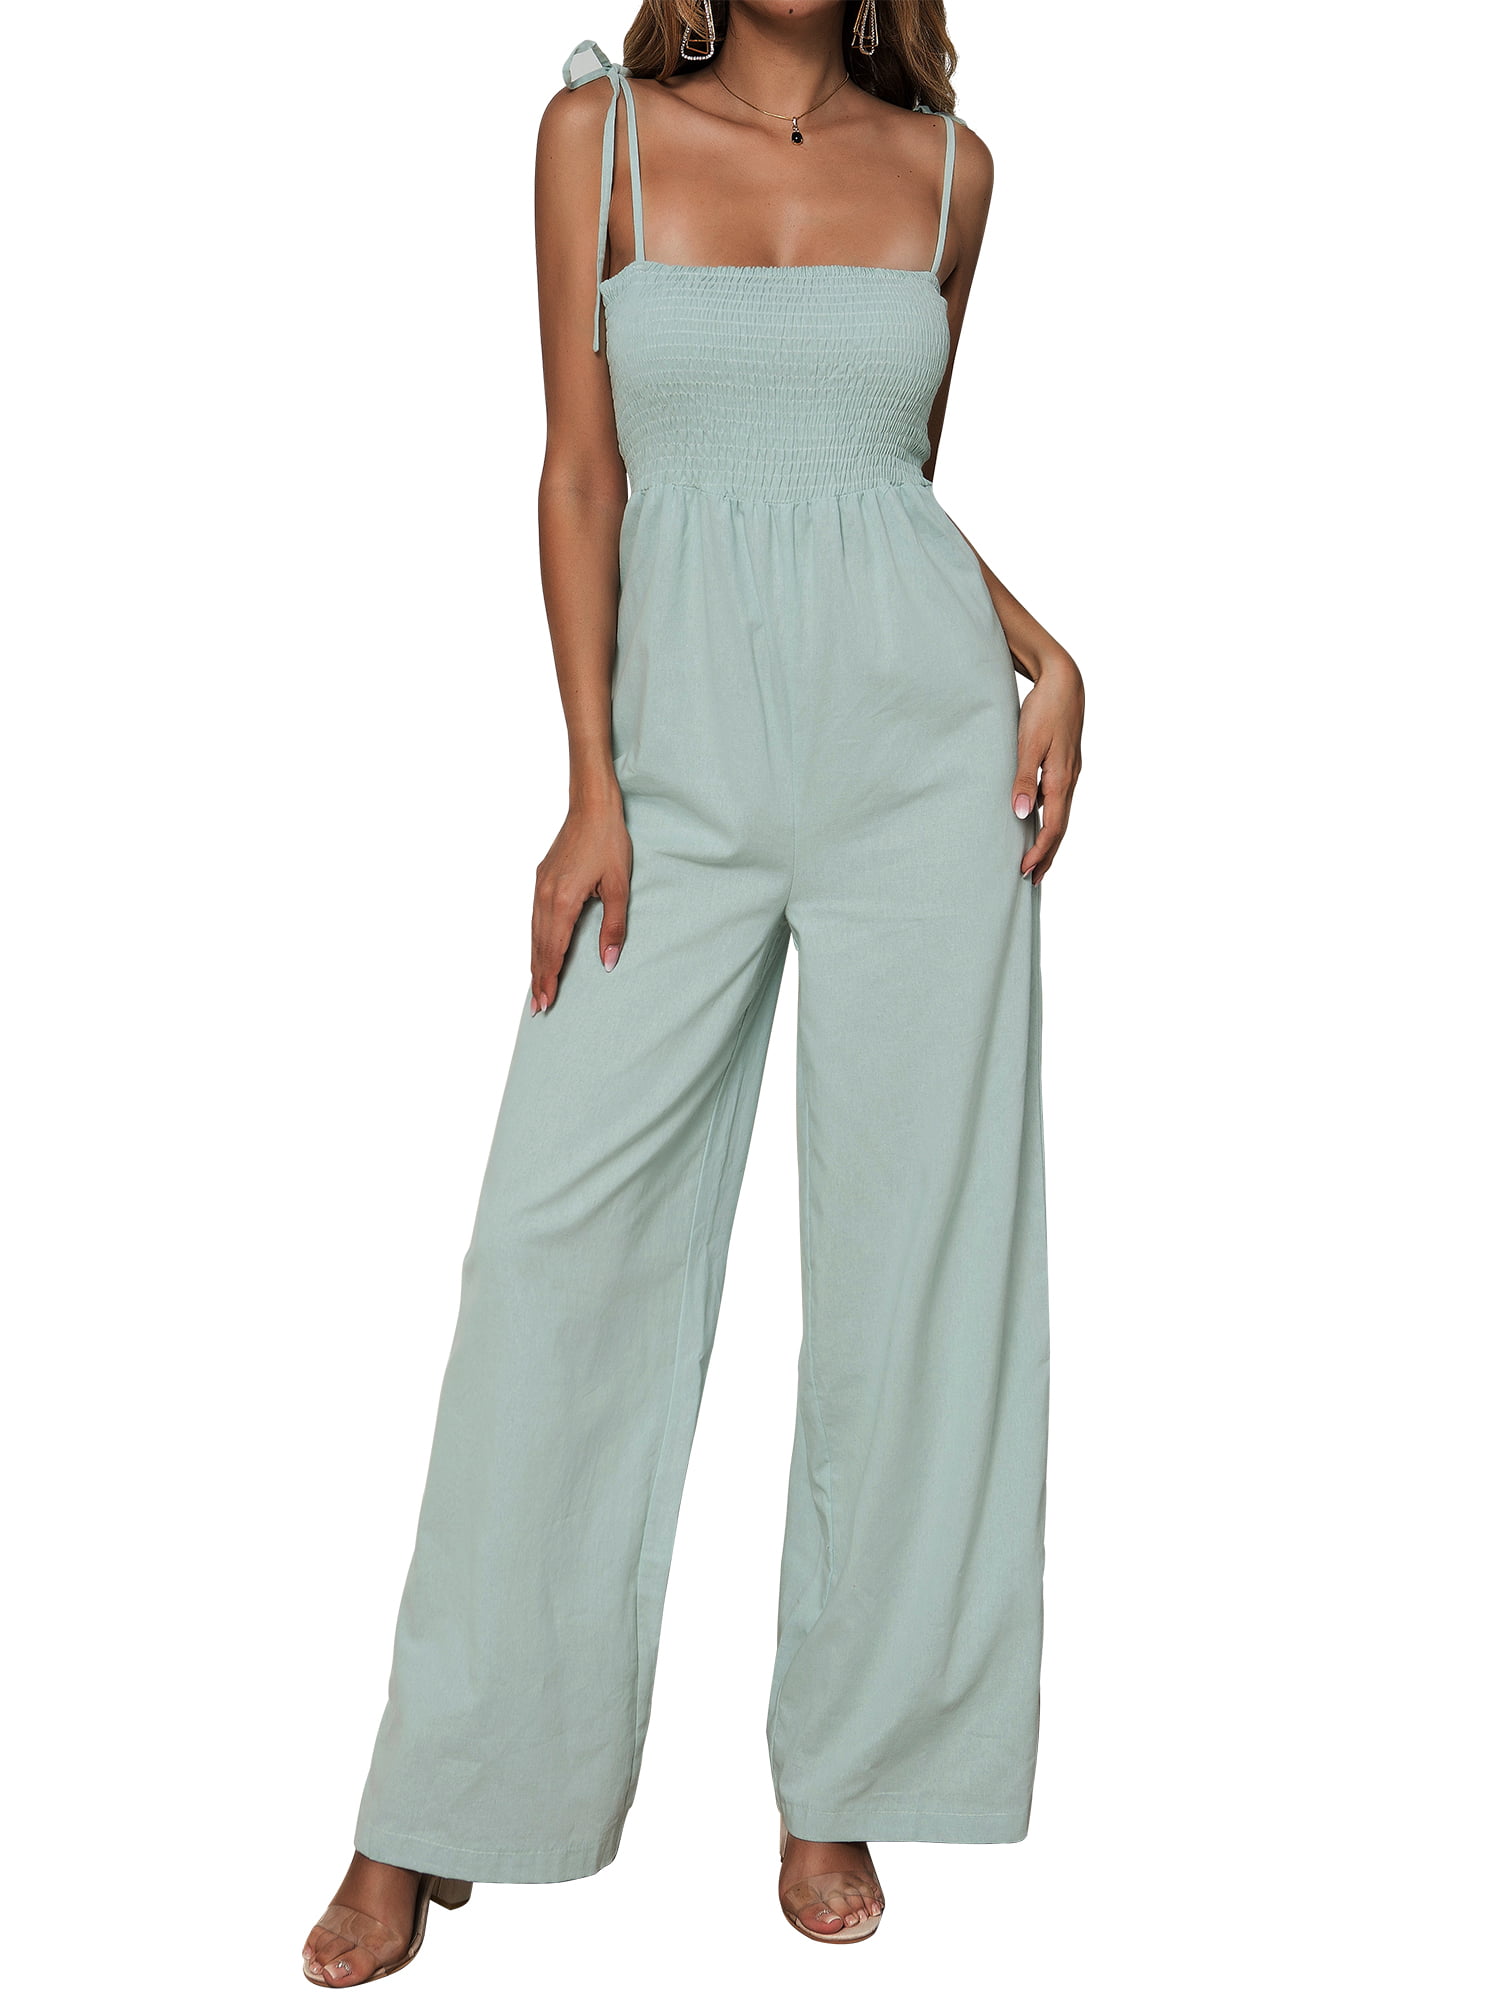 Knot Front Spaghetti Strap Sleeveless Wide Leg Long Pant Playsuit Womens Casual Jumpsuit Romper